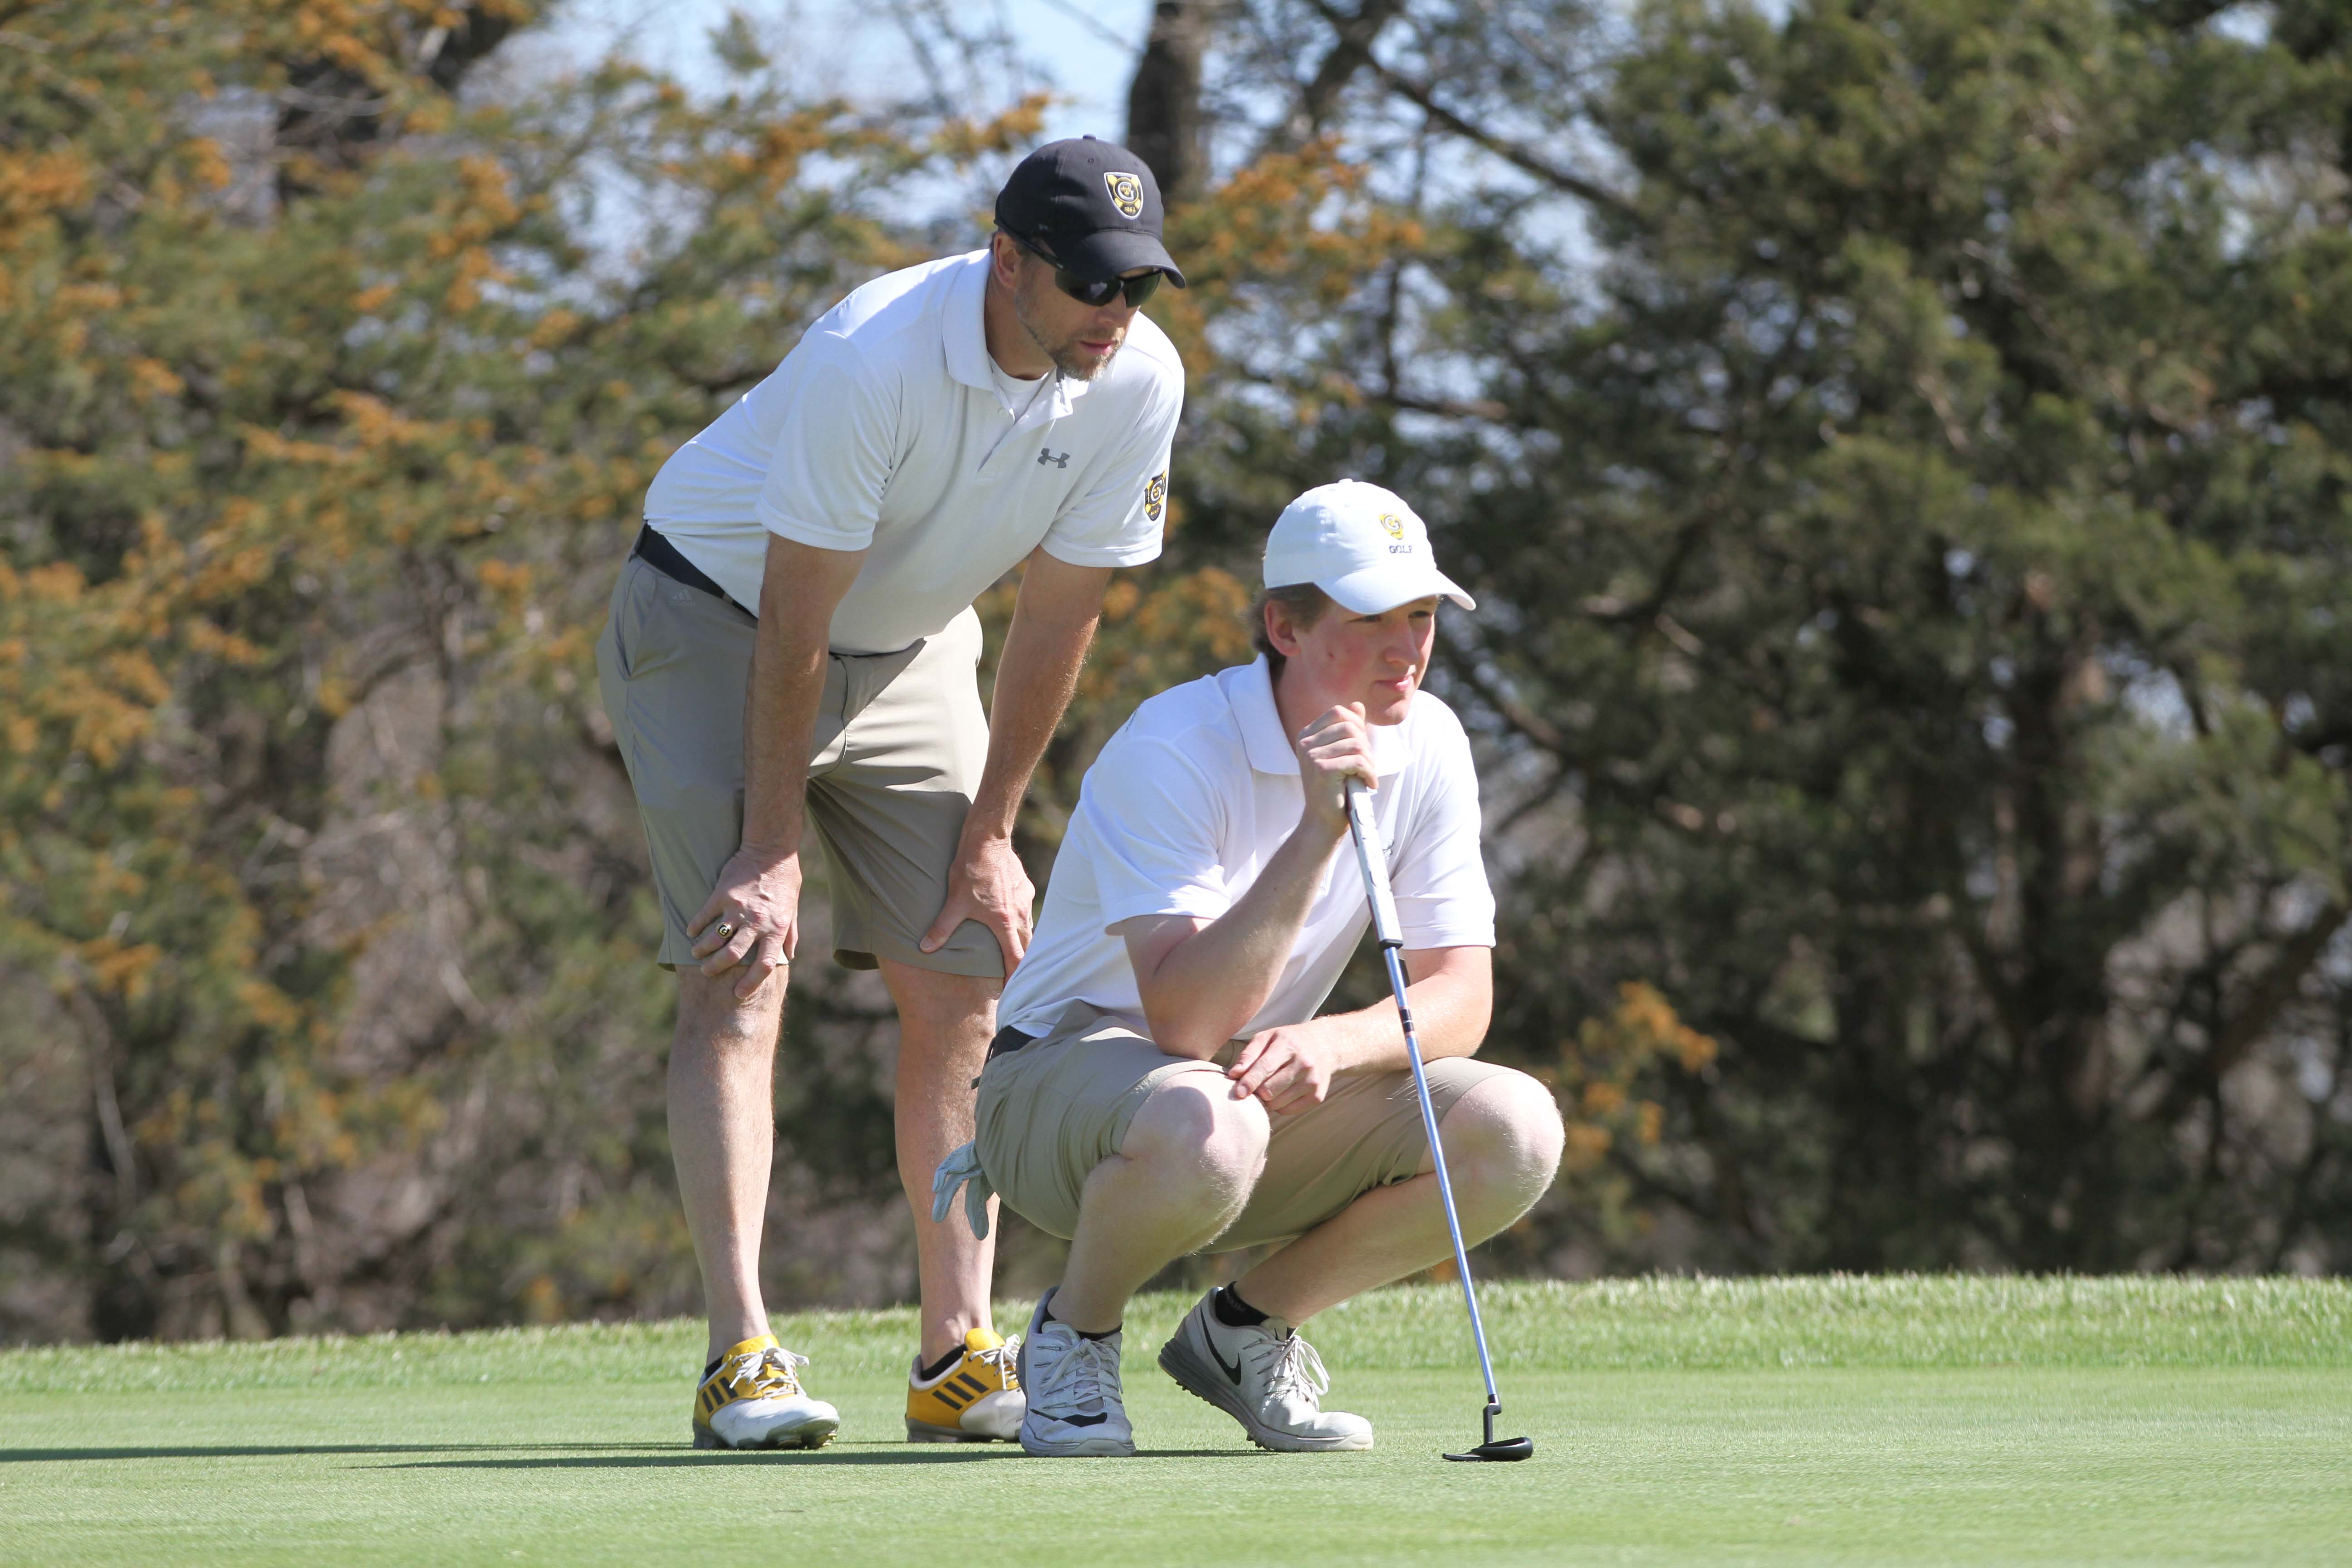 Sophomore Max Ullan and Head Coach Scott Moe analyze the green to prepare for a putt. The Gusties finished eighth out of 17 teams this past weekend at the Twin Cities Invite.